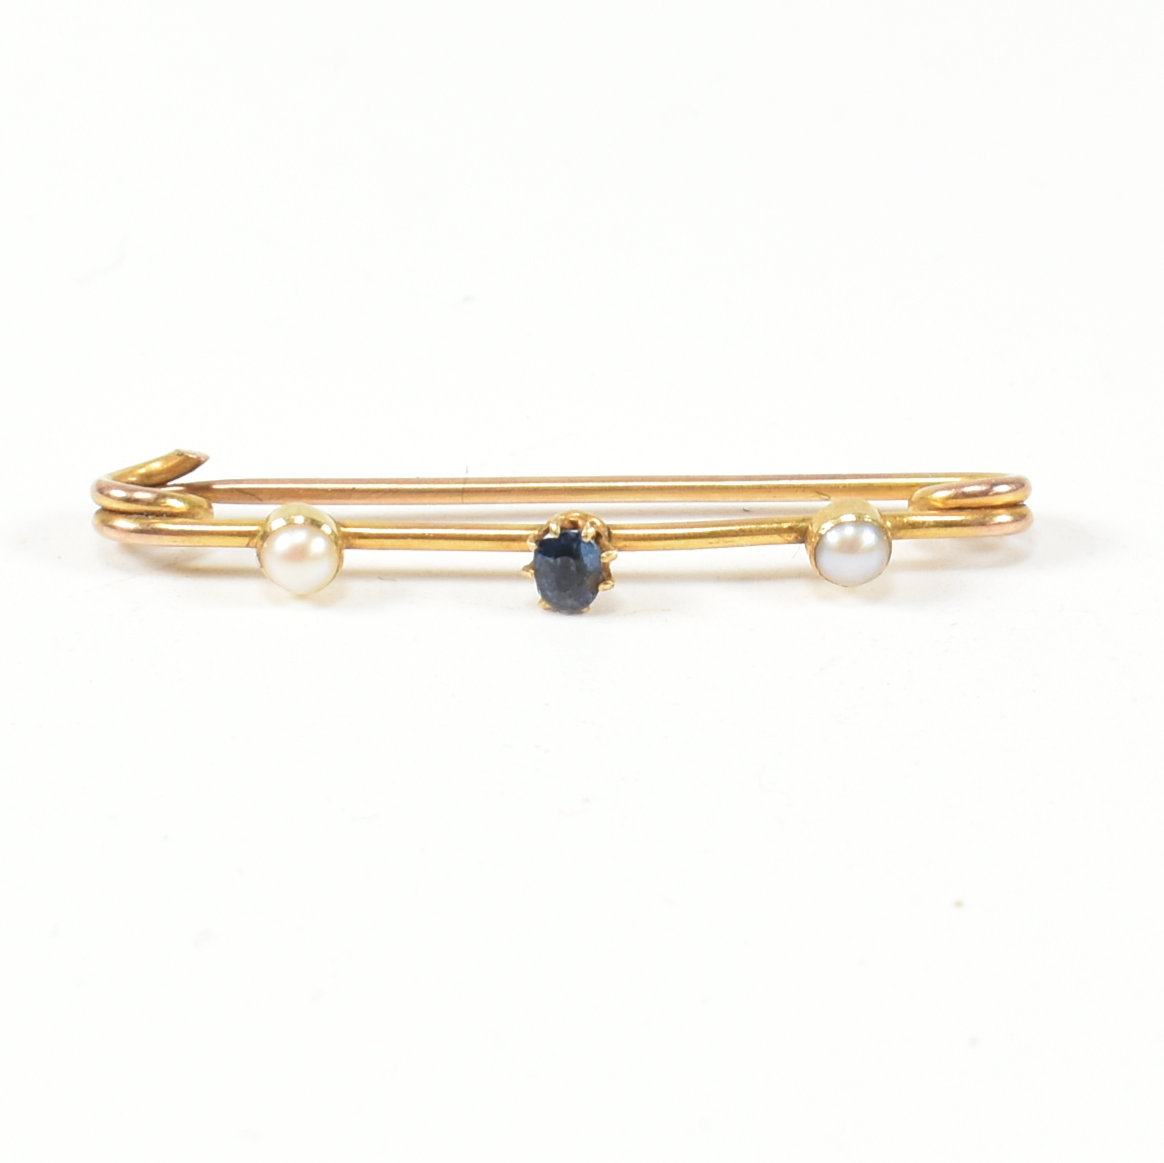 GOLD SAPPHIRE & PEARL BROOCH PIN - Image 2 of 5